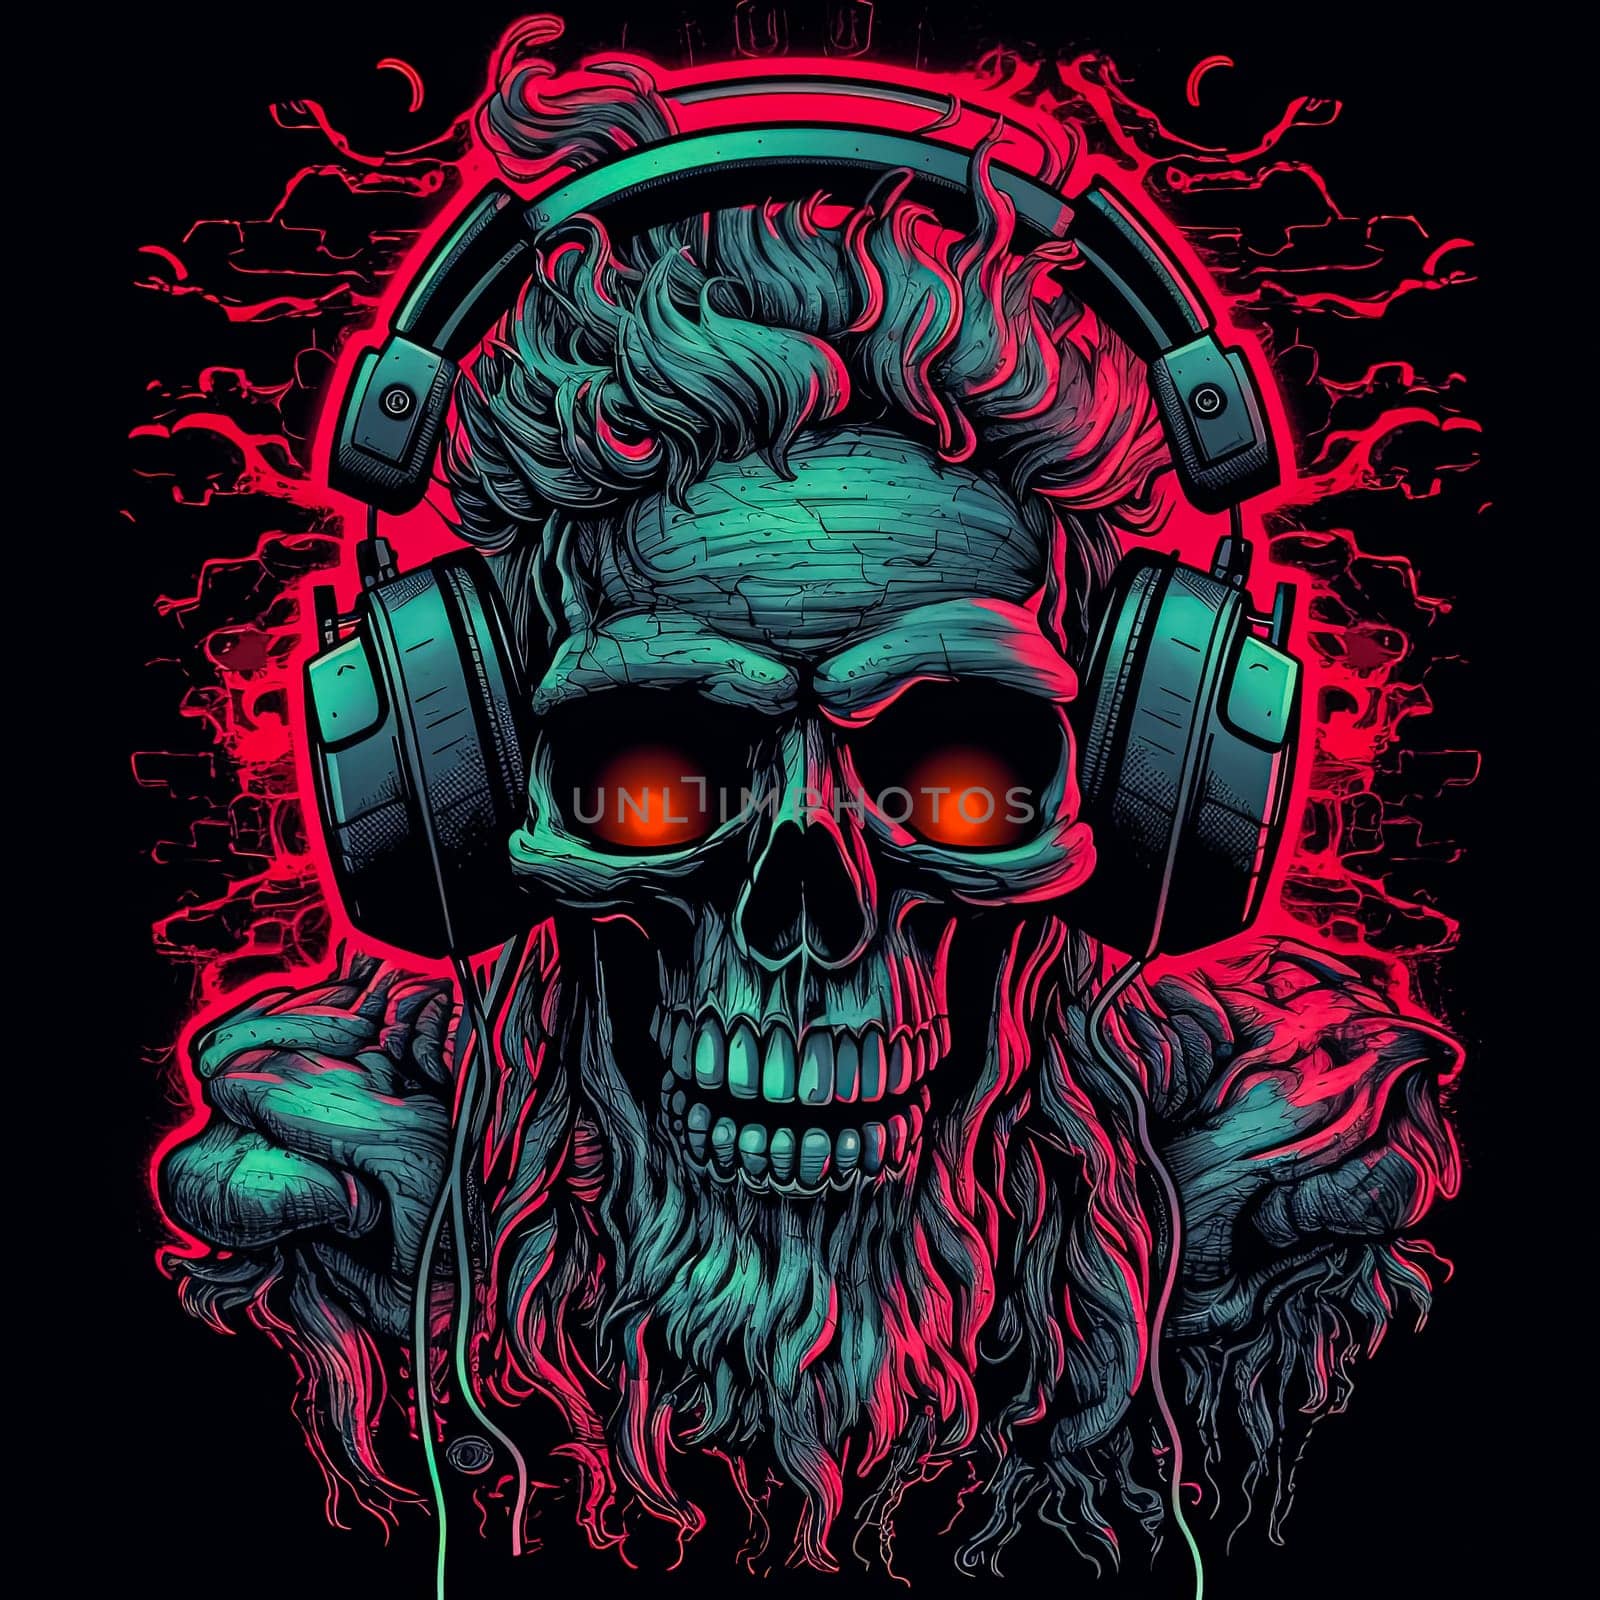 A skull with headphones on it. The skull is wearing headphones and has a beard